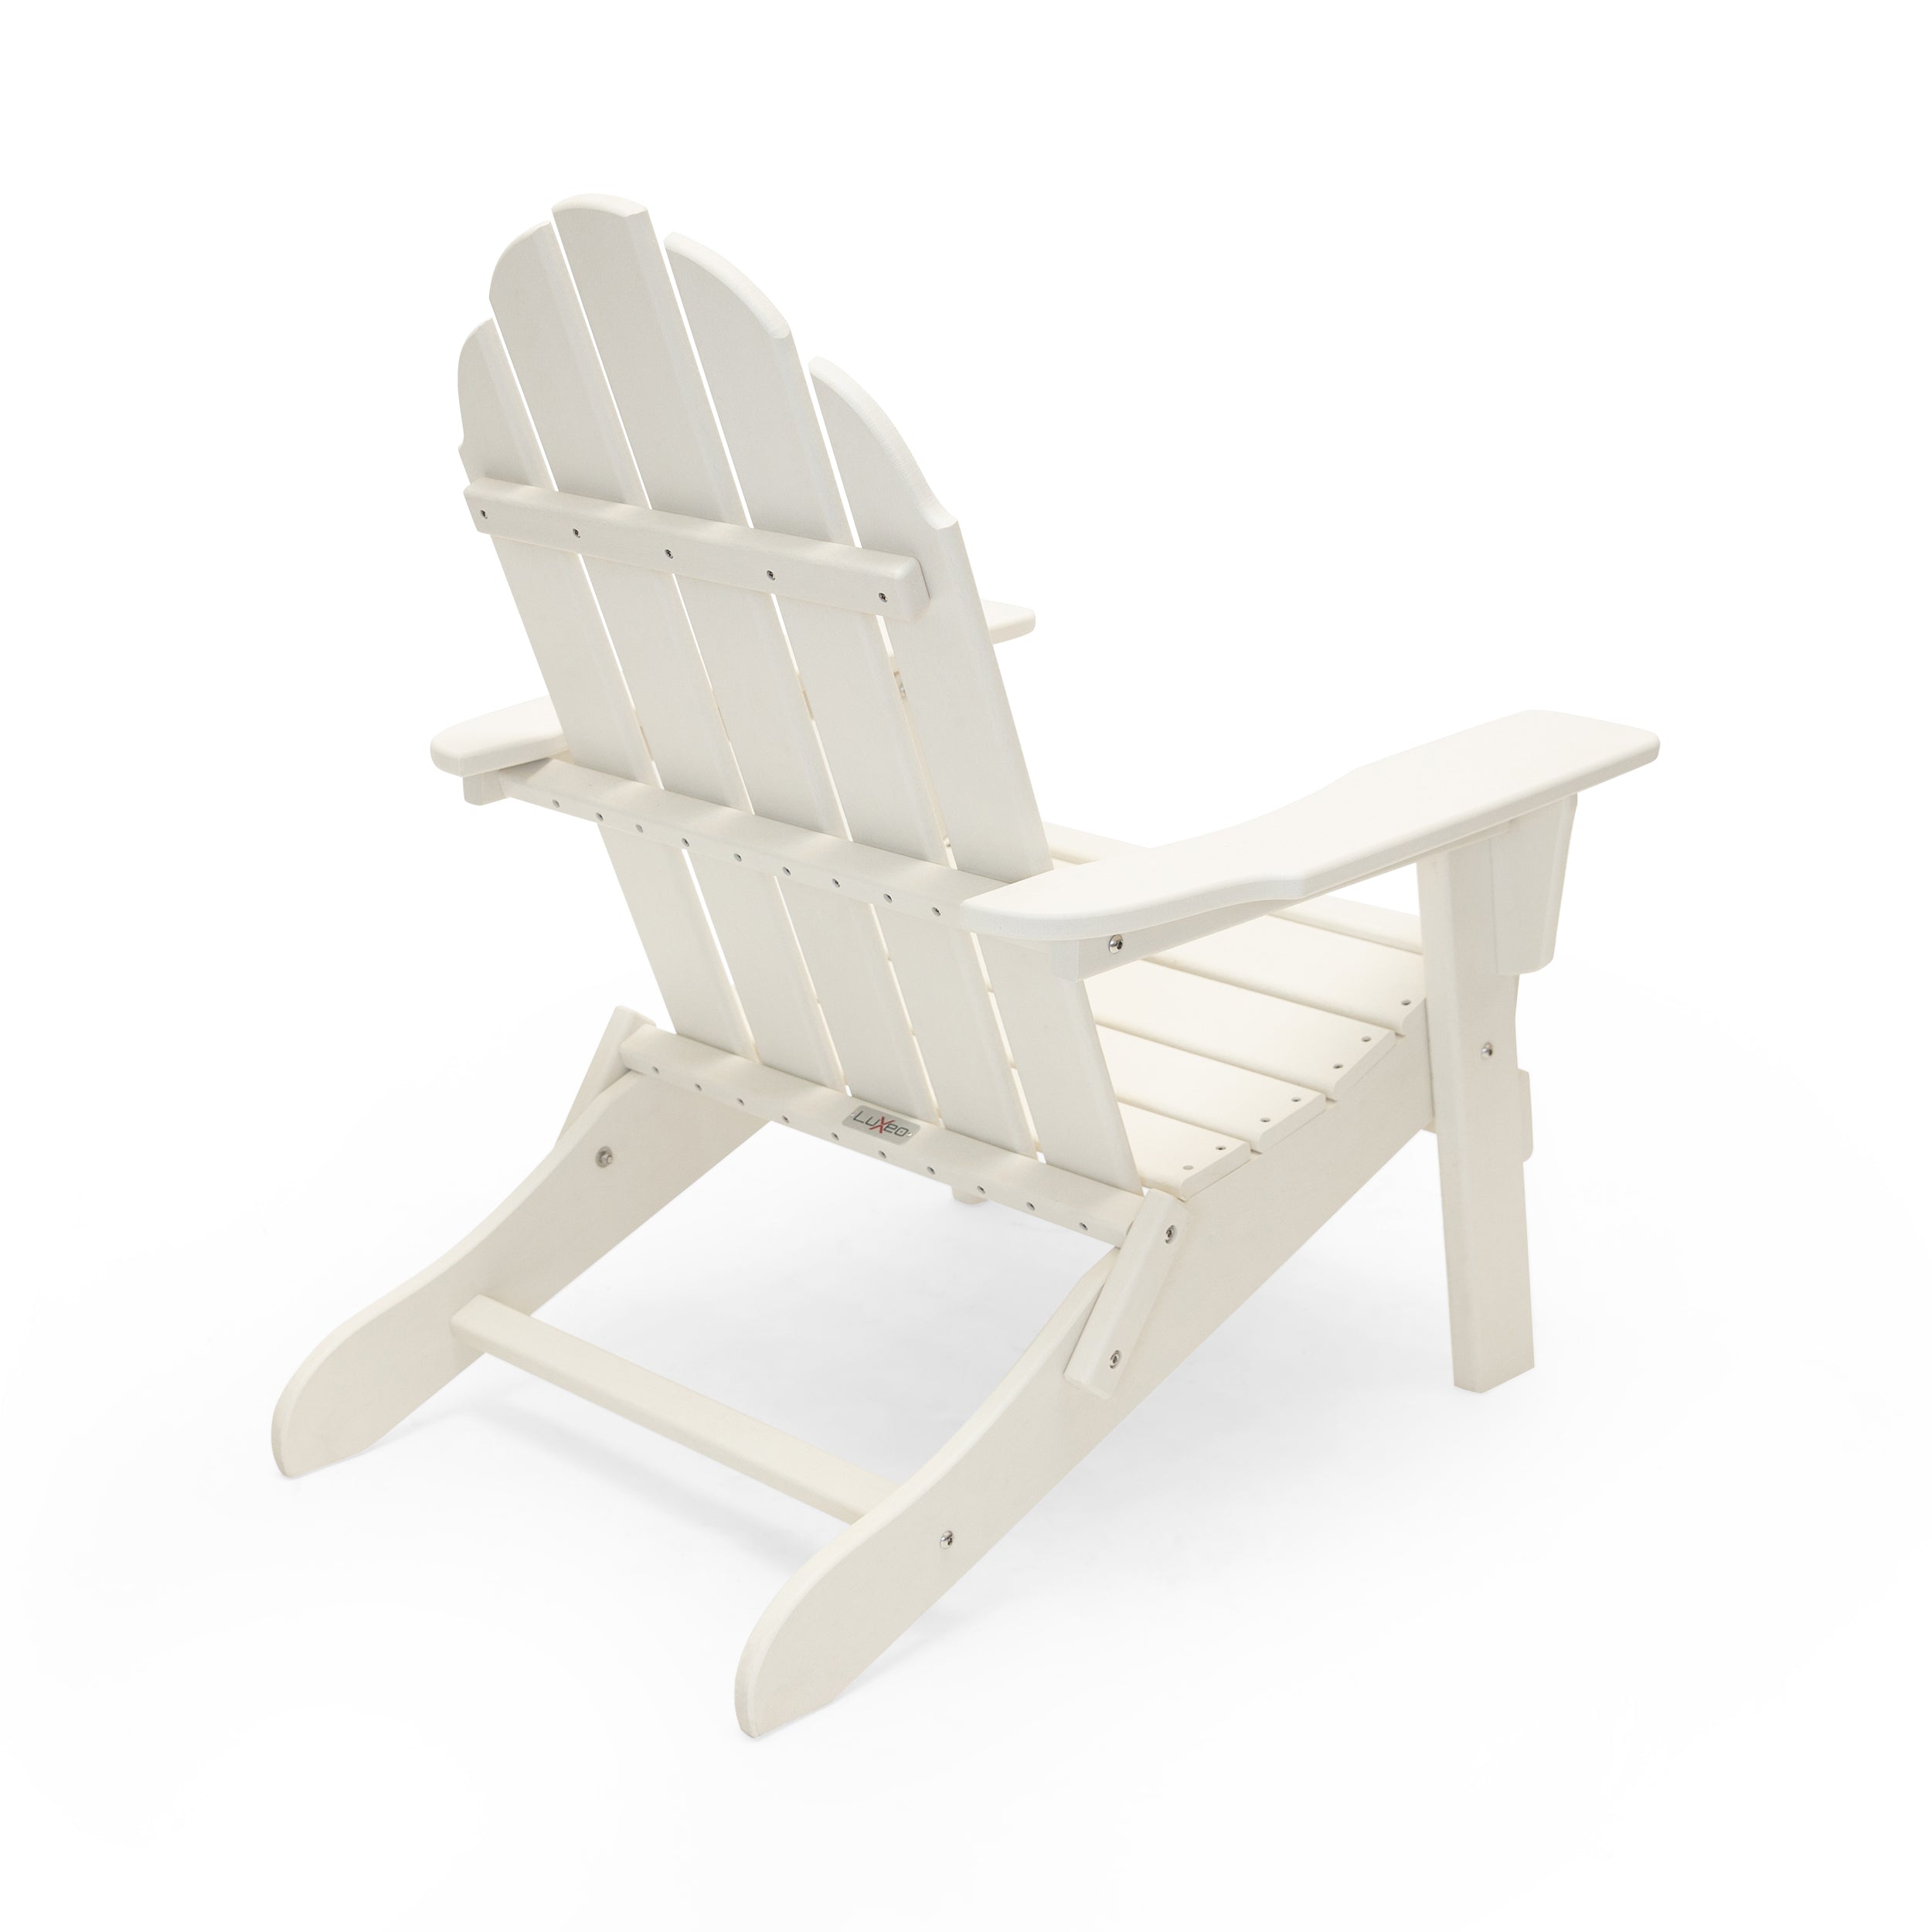 Balboa HDPE Recycled Plastic Folding Adirondack Chair and Table Set